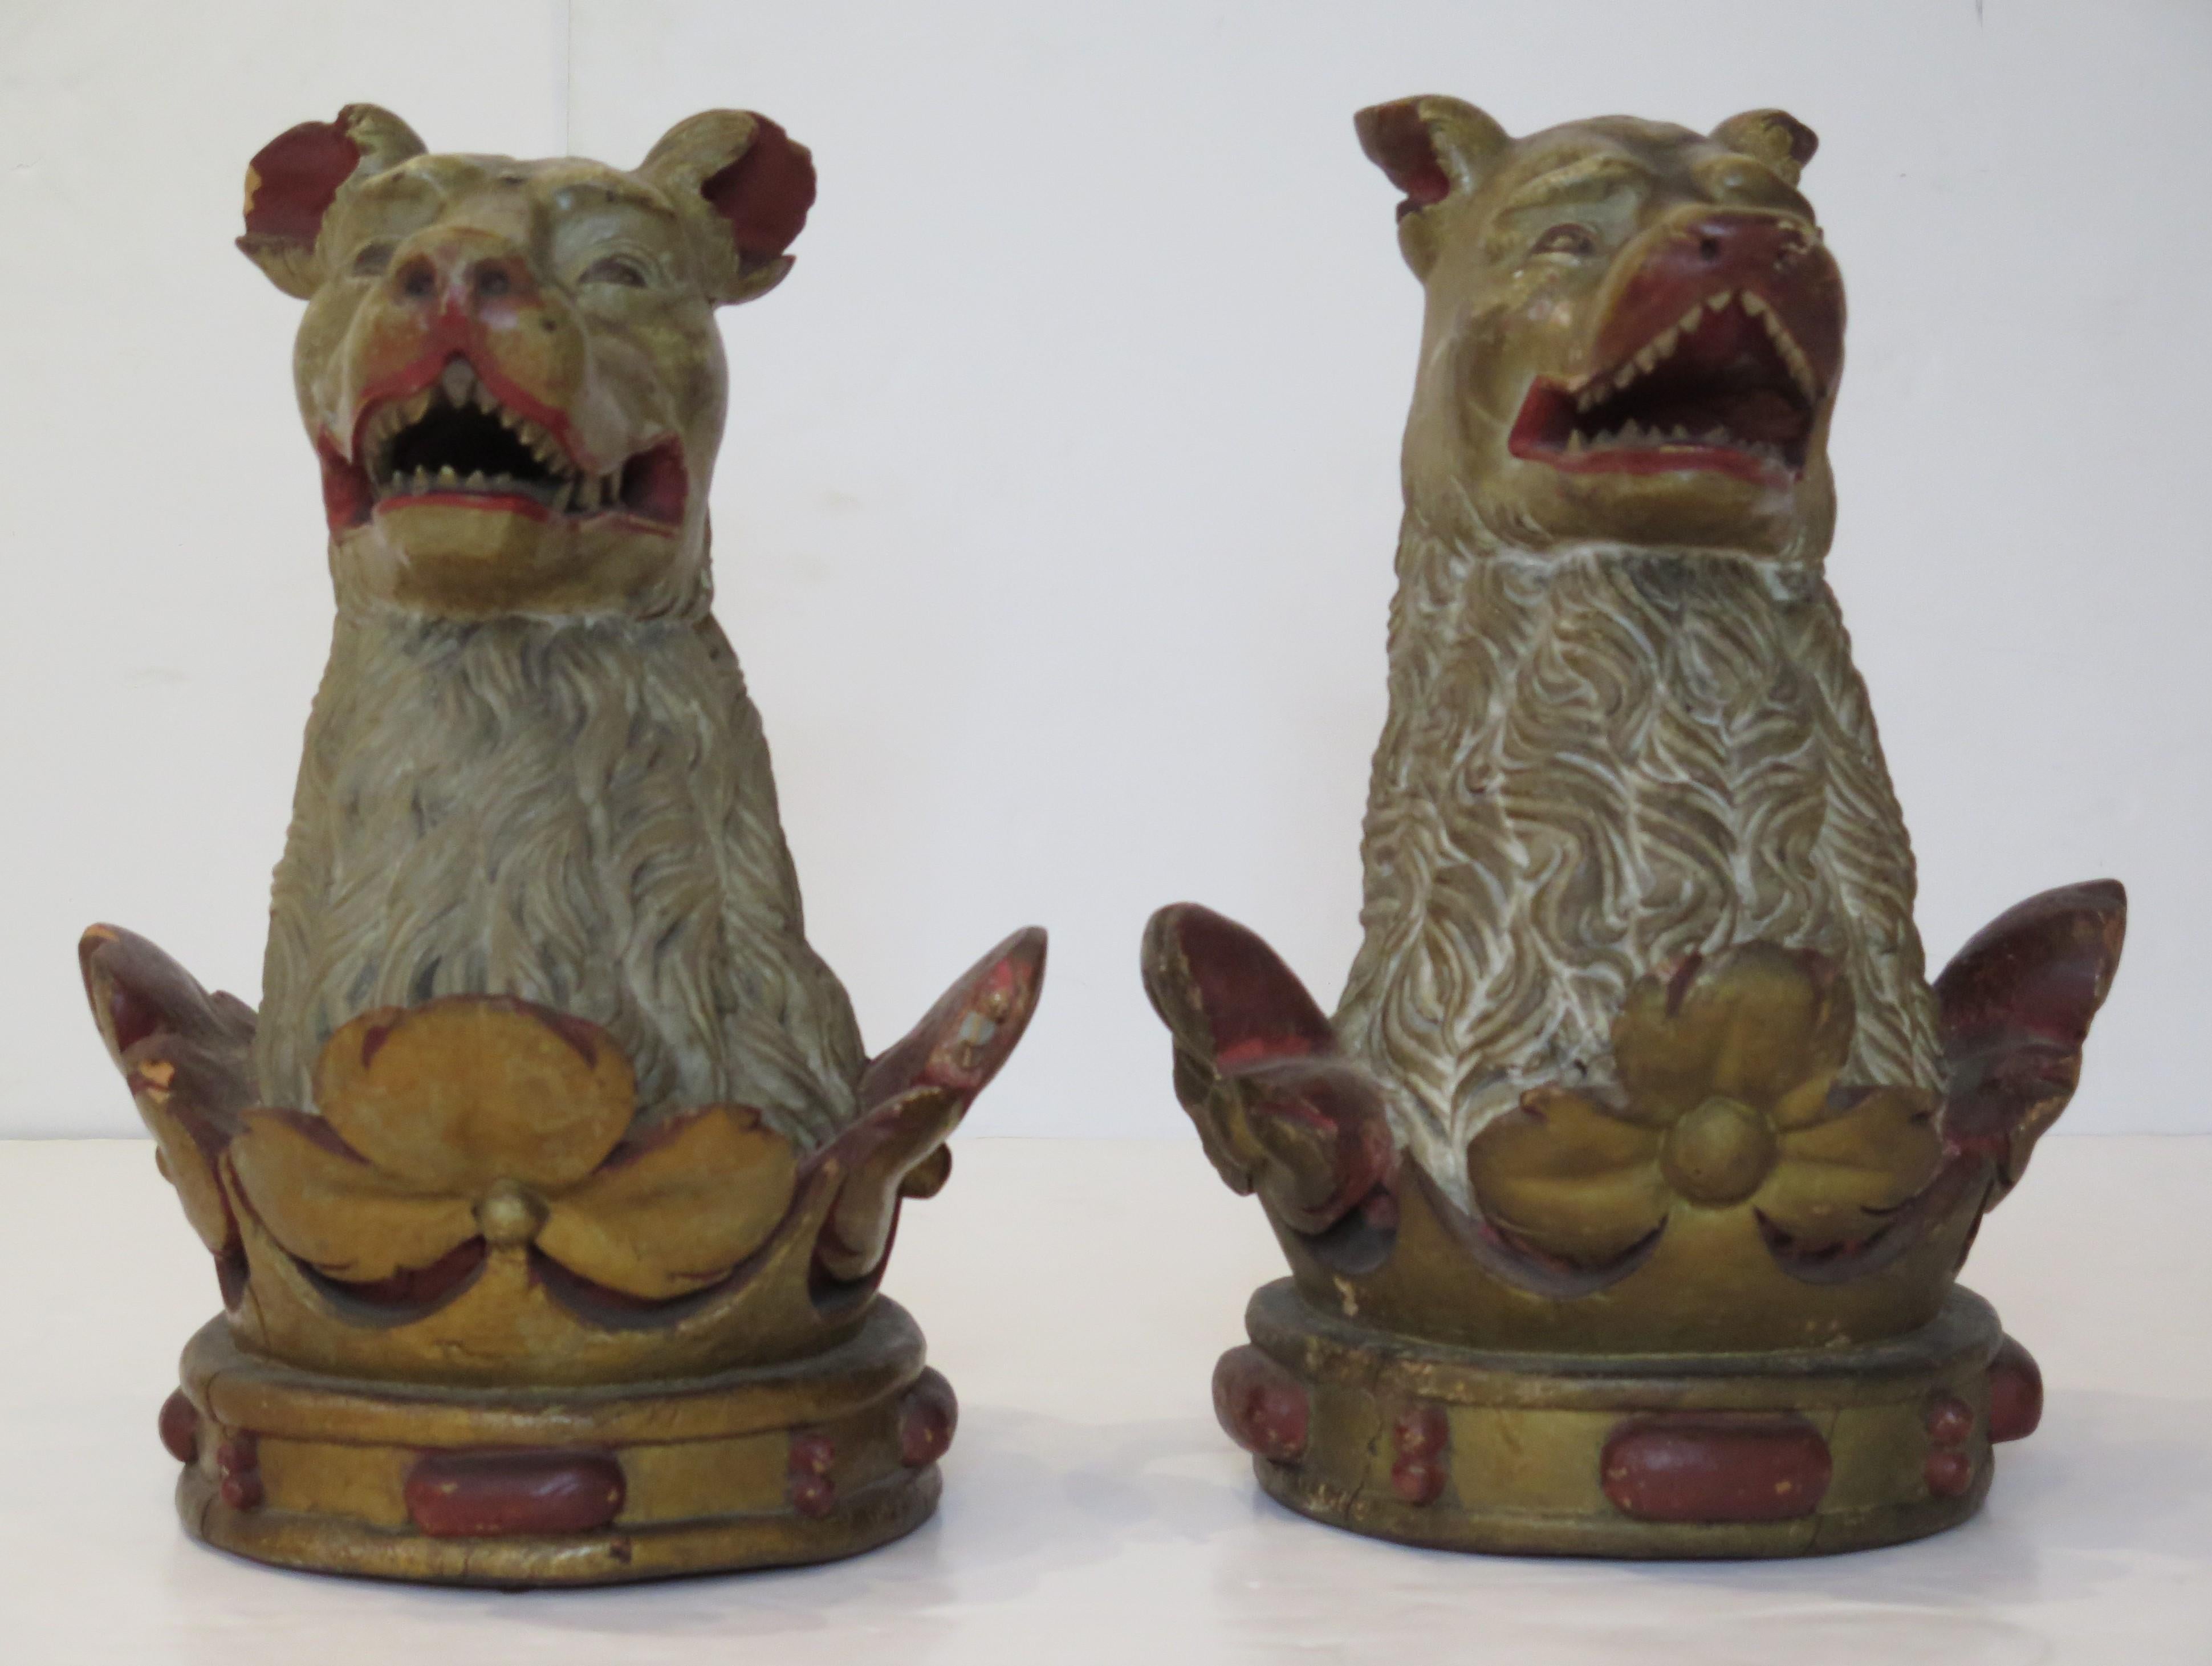 carved, painted, and gilded wood armorial crests / carvings, great faces, lots of personality, great teeth

''out of a ducal coronet or, a bear's head, ppr.''

perhaps having to do with the Family Brereton

(we believe them to be bears, not wolves,